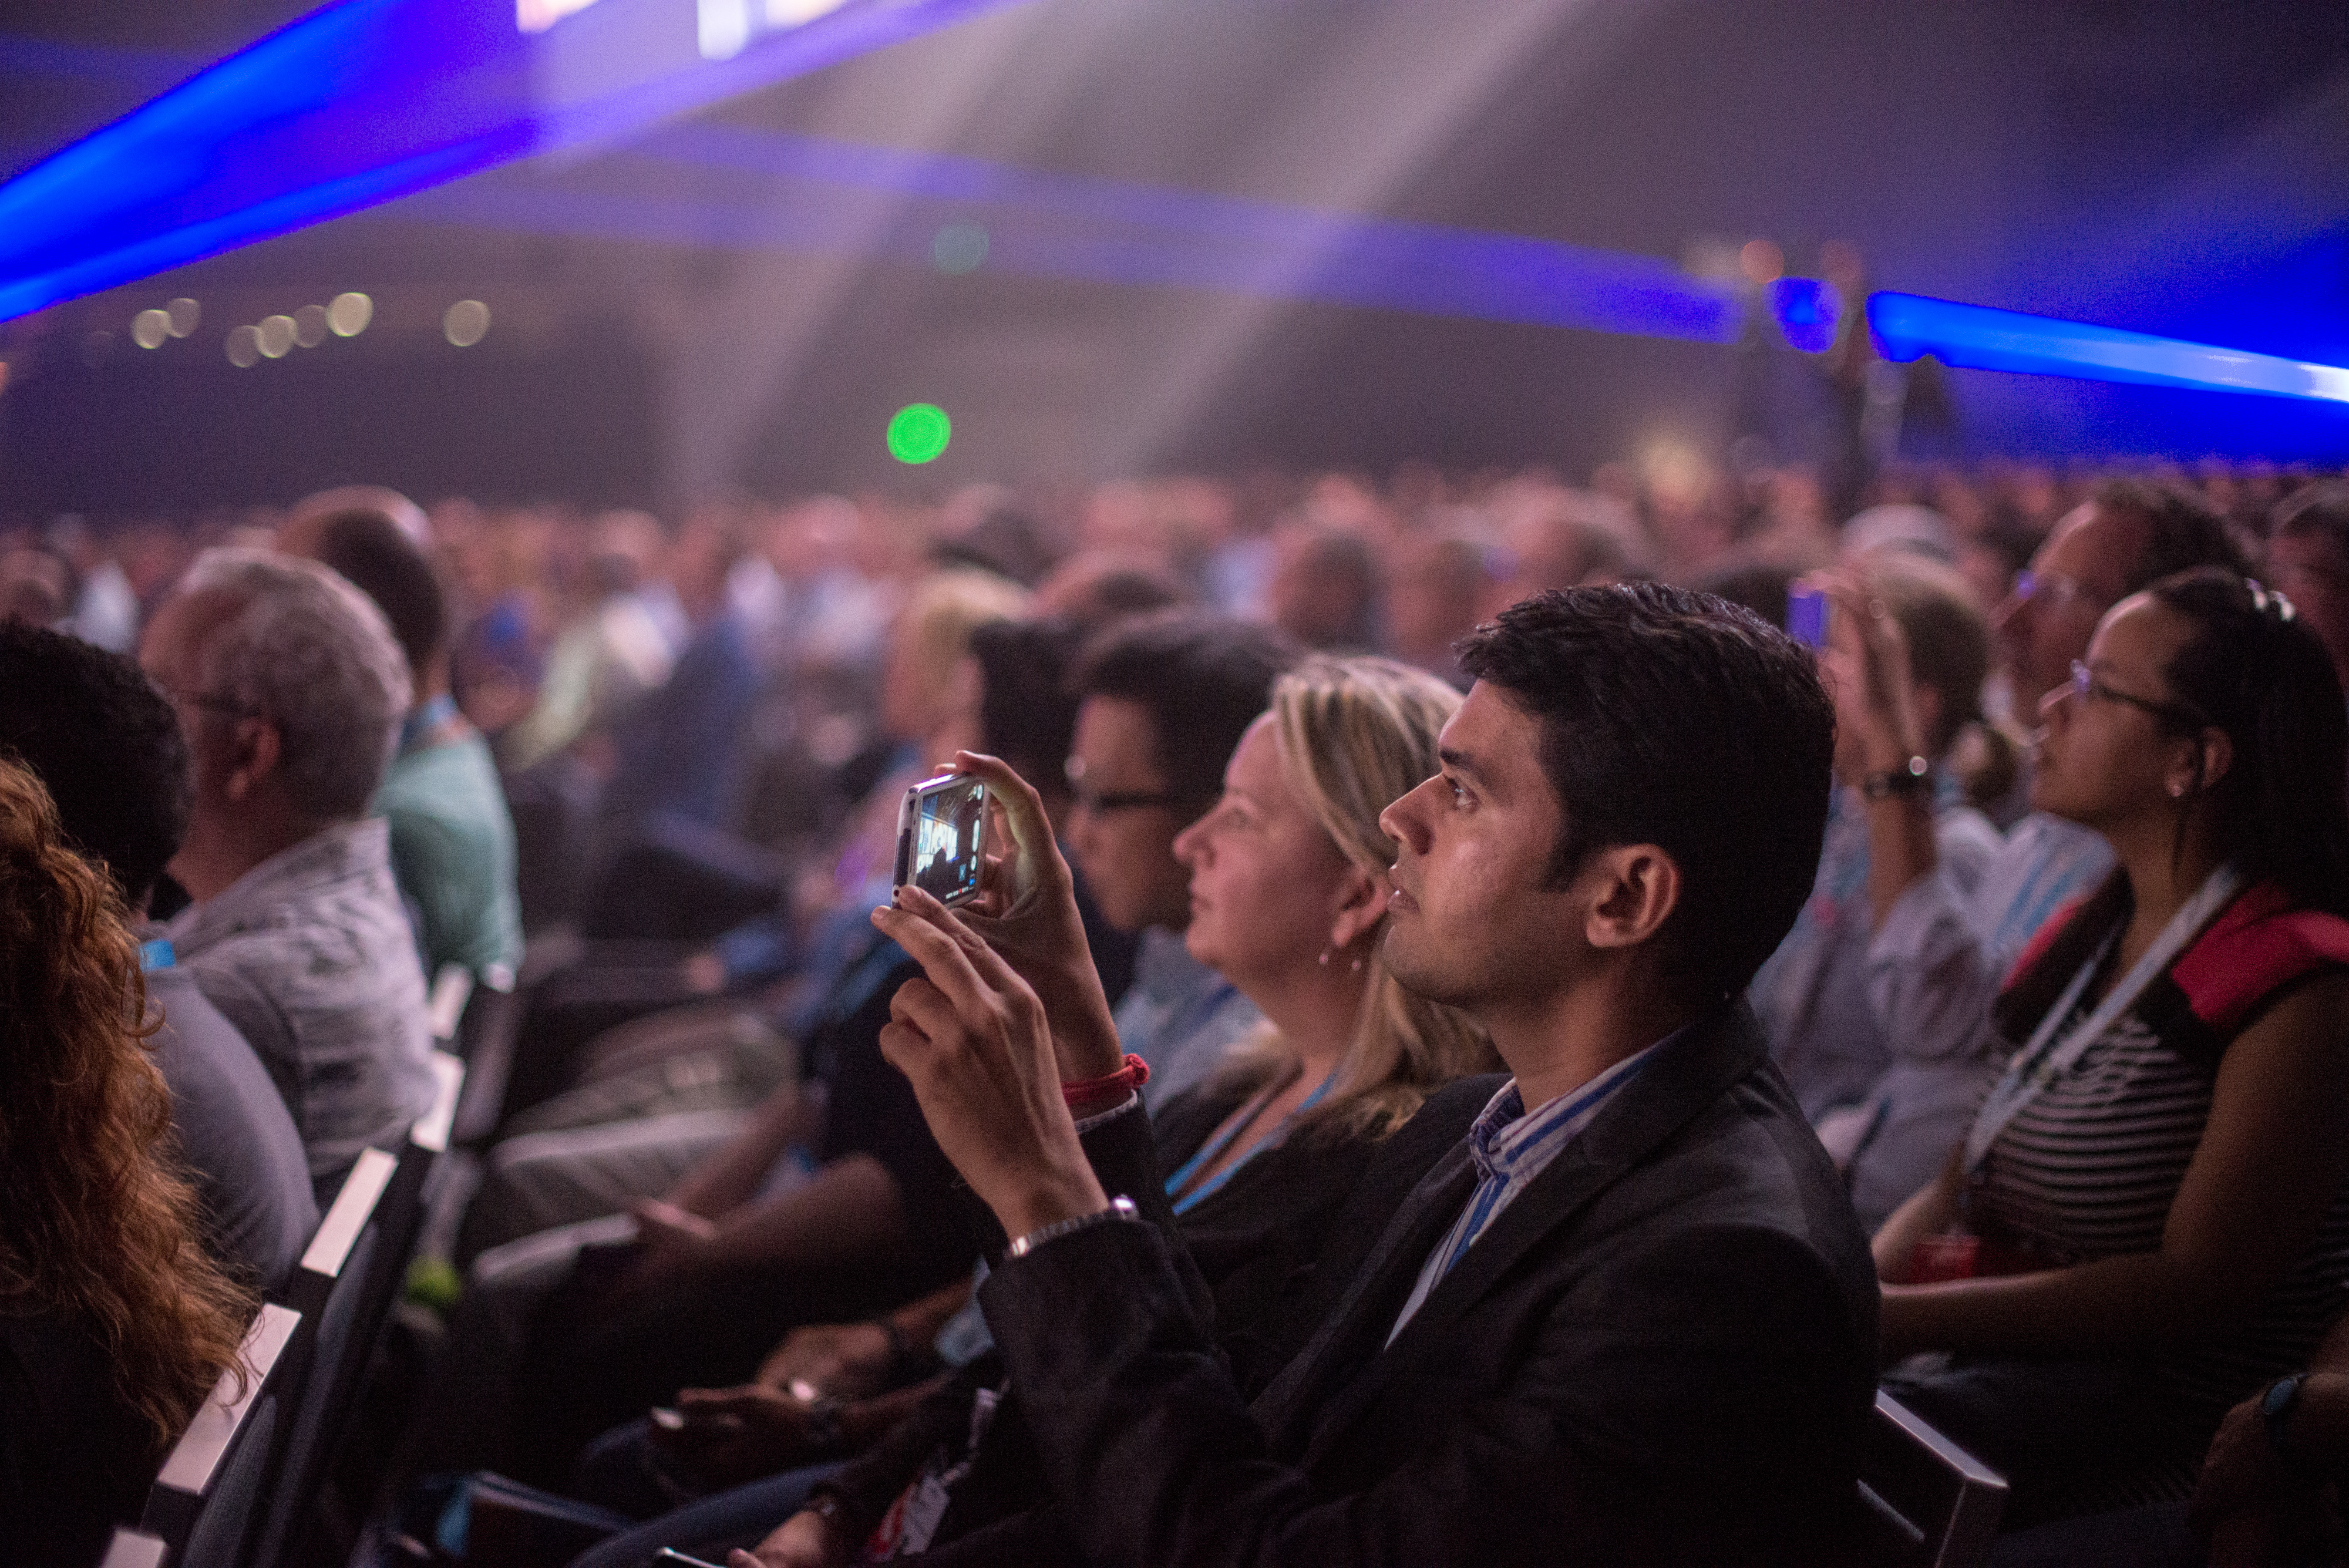 3 Ways to Get the Most Out of Dreamforce 2016